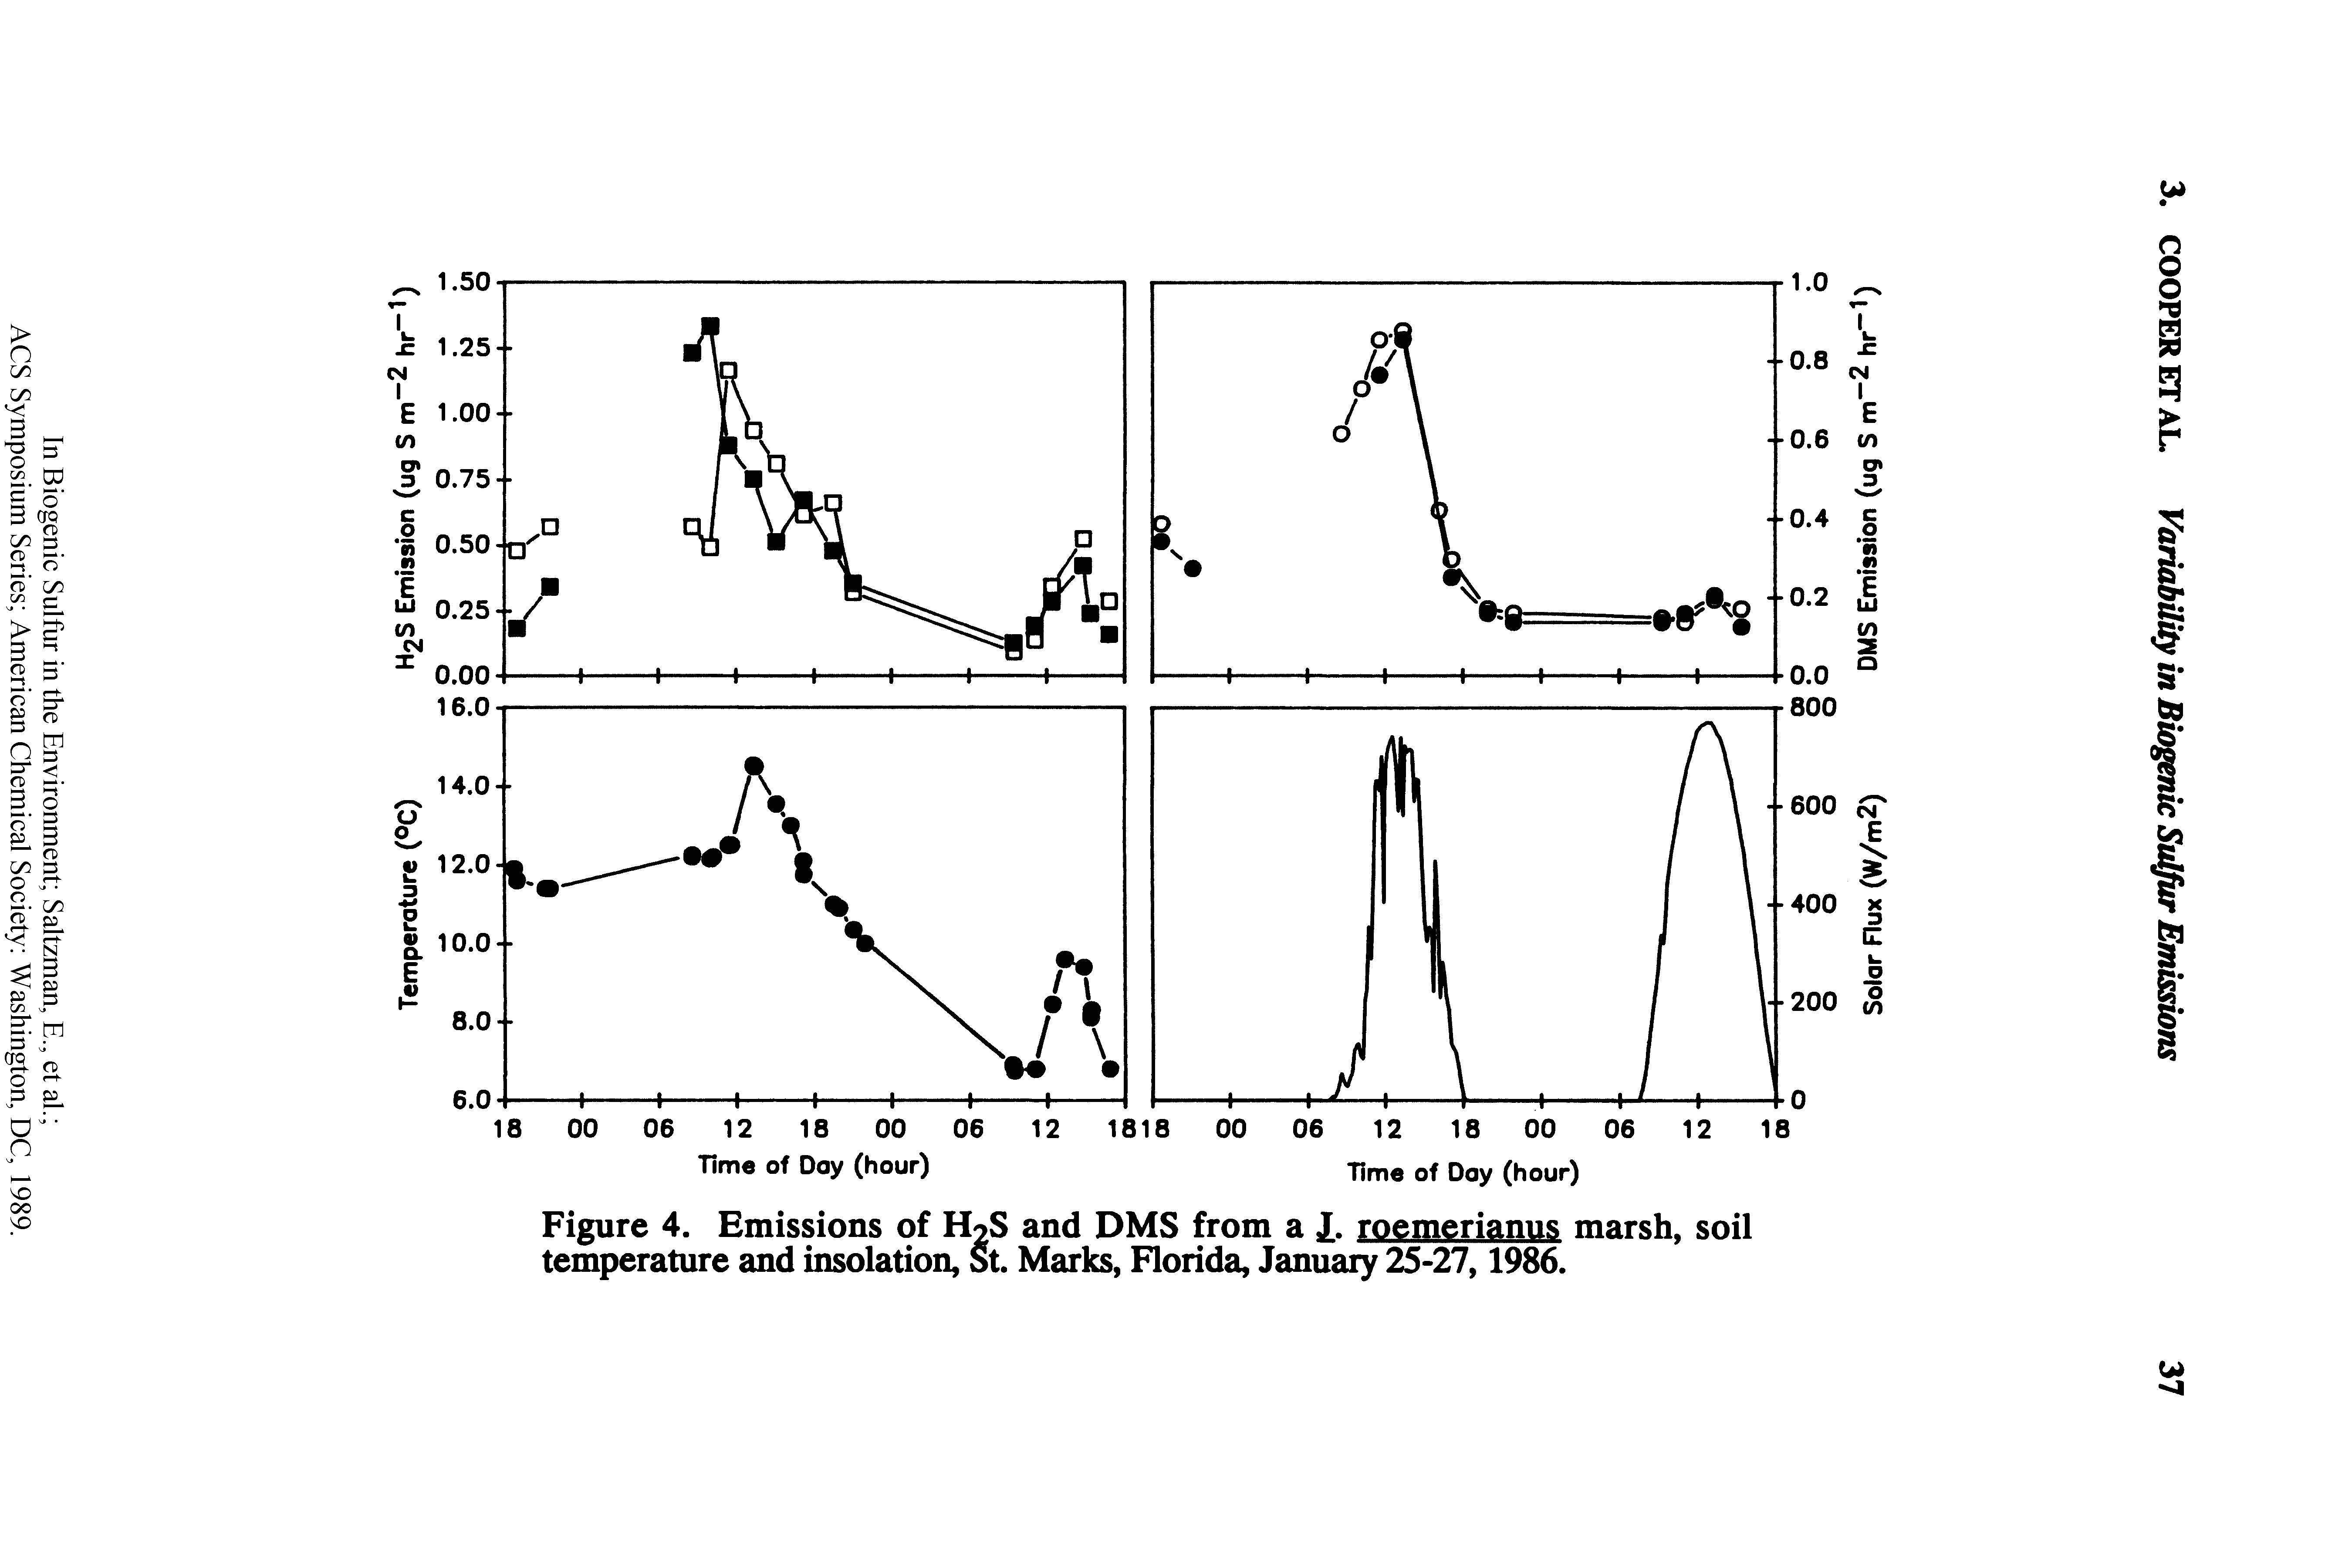 Figure 4. Emissions of H->S and DMS from a I. roemerianus marsh, soil temperature and insolation, St. Marks, Florida, Januaiy 25-27,1986.